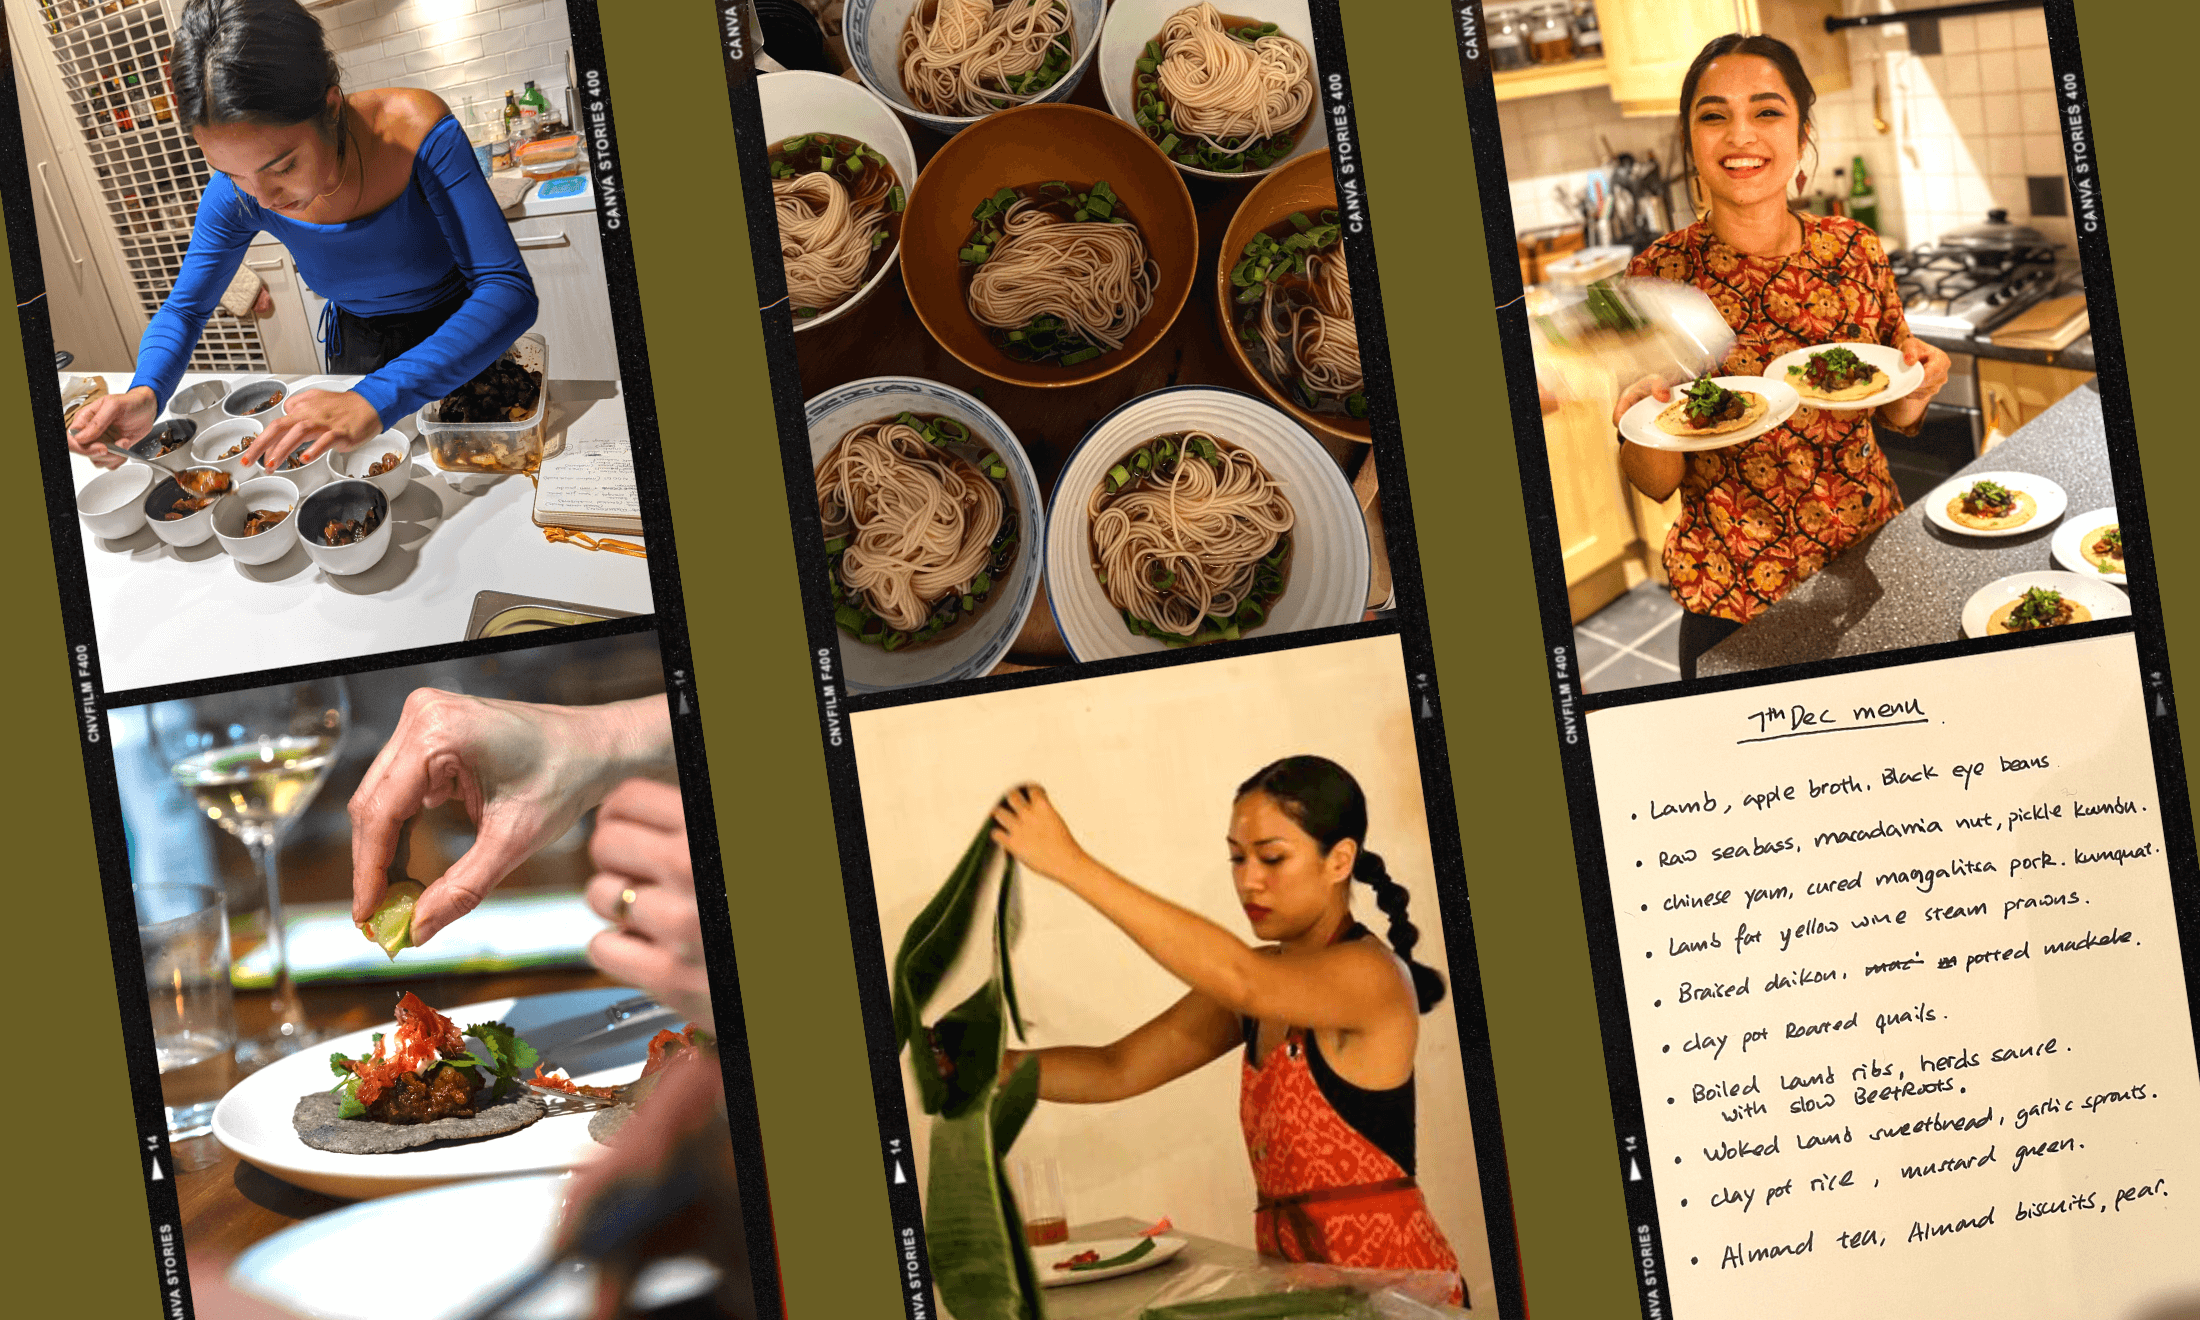 A composite image with two images across three columns. The first column shows a woman in her kitchen preparing food and then a close up of the food. The second column is of bowls of noodles, and another woman preparing in a kitchen. The third column is of a woman preparing food and a handwritten menu